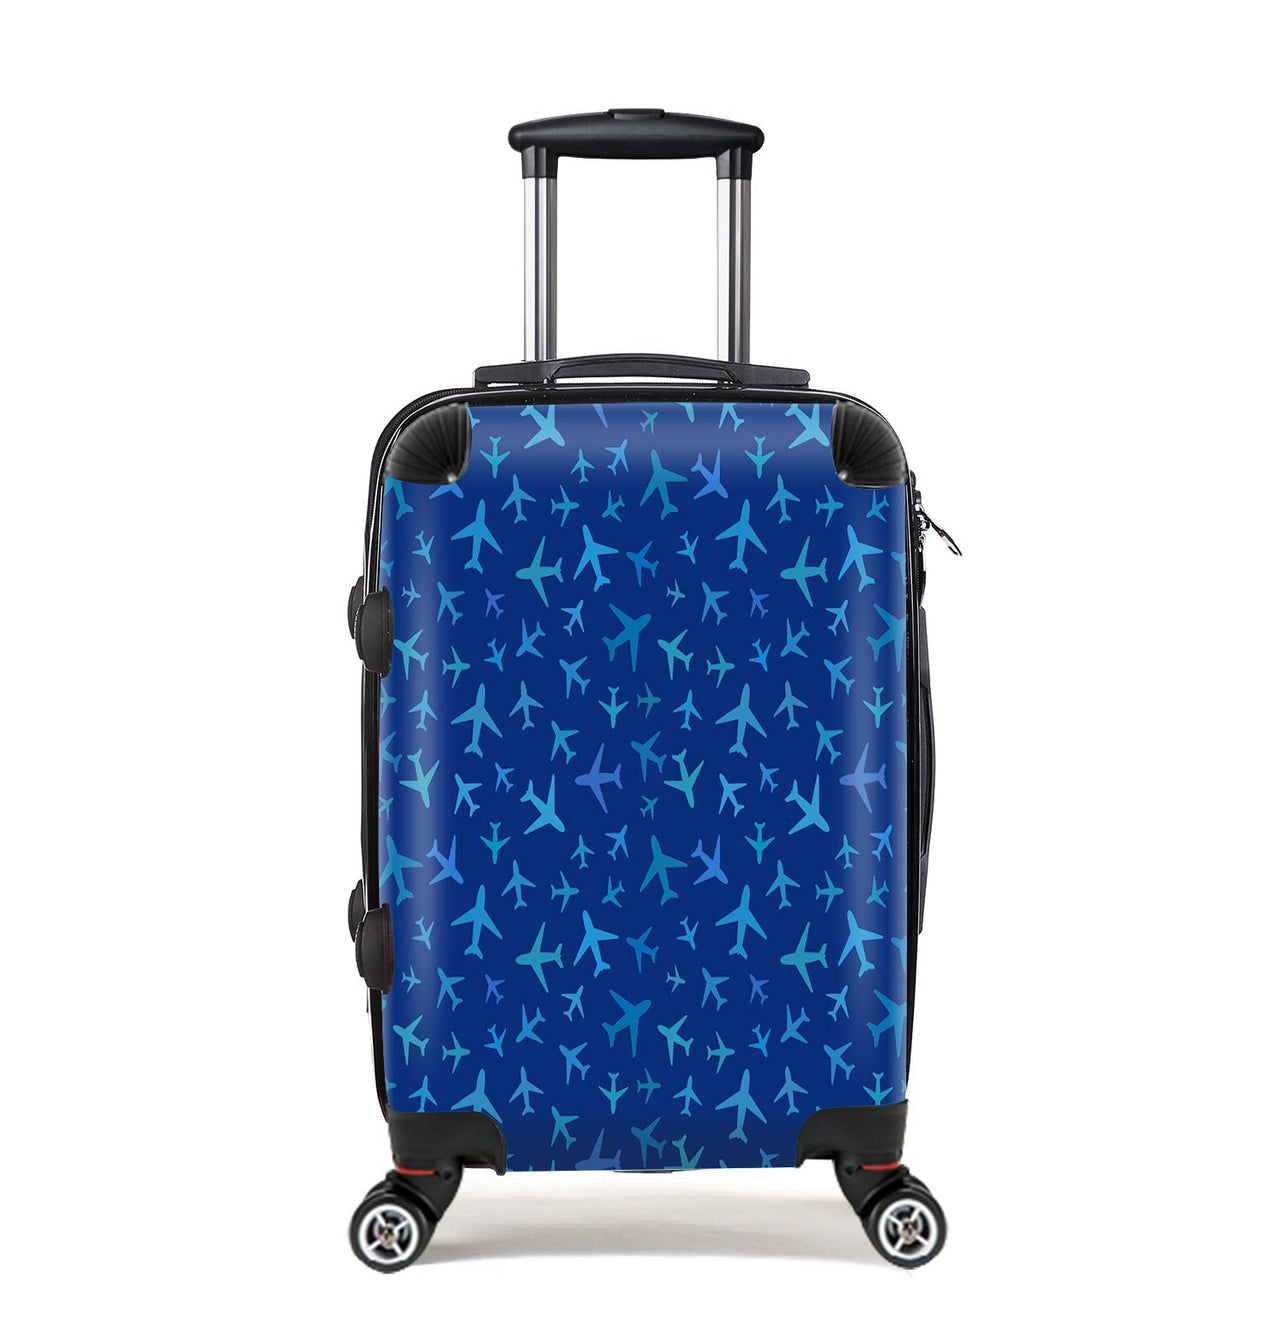 Many Airplanes Blue Designed Cabin Size Luggages